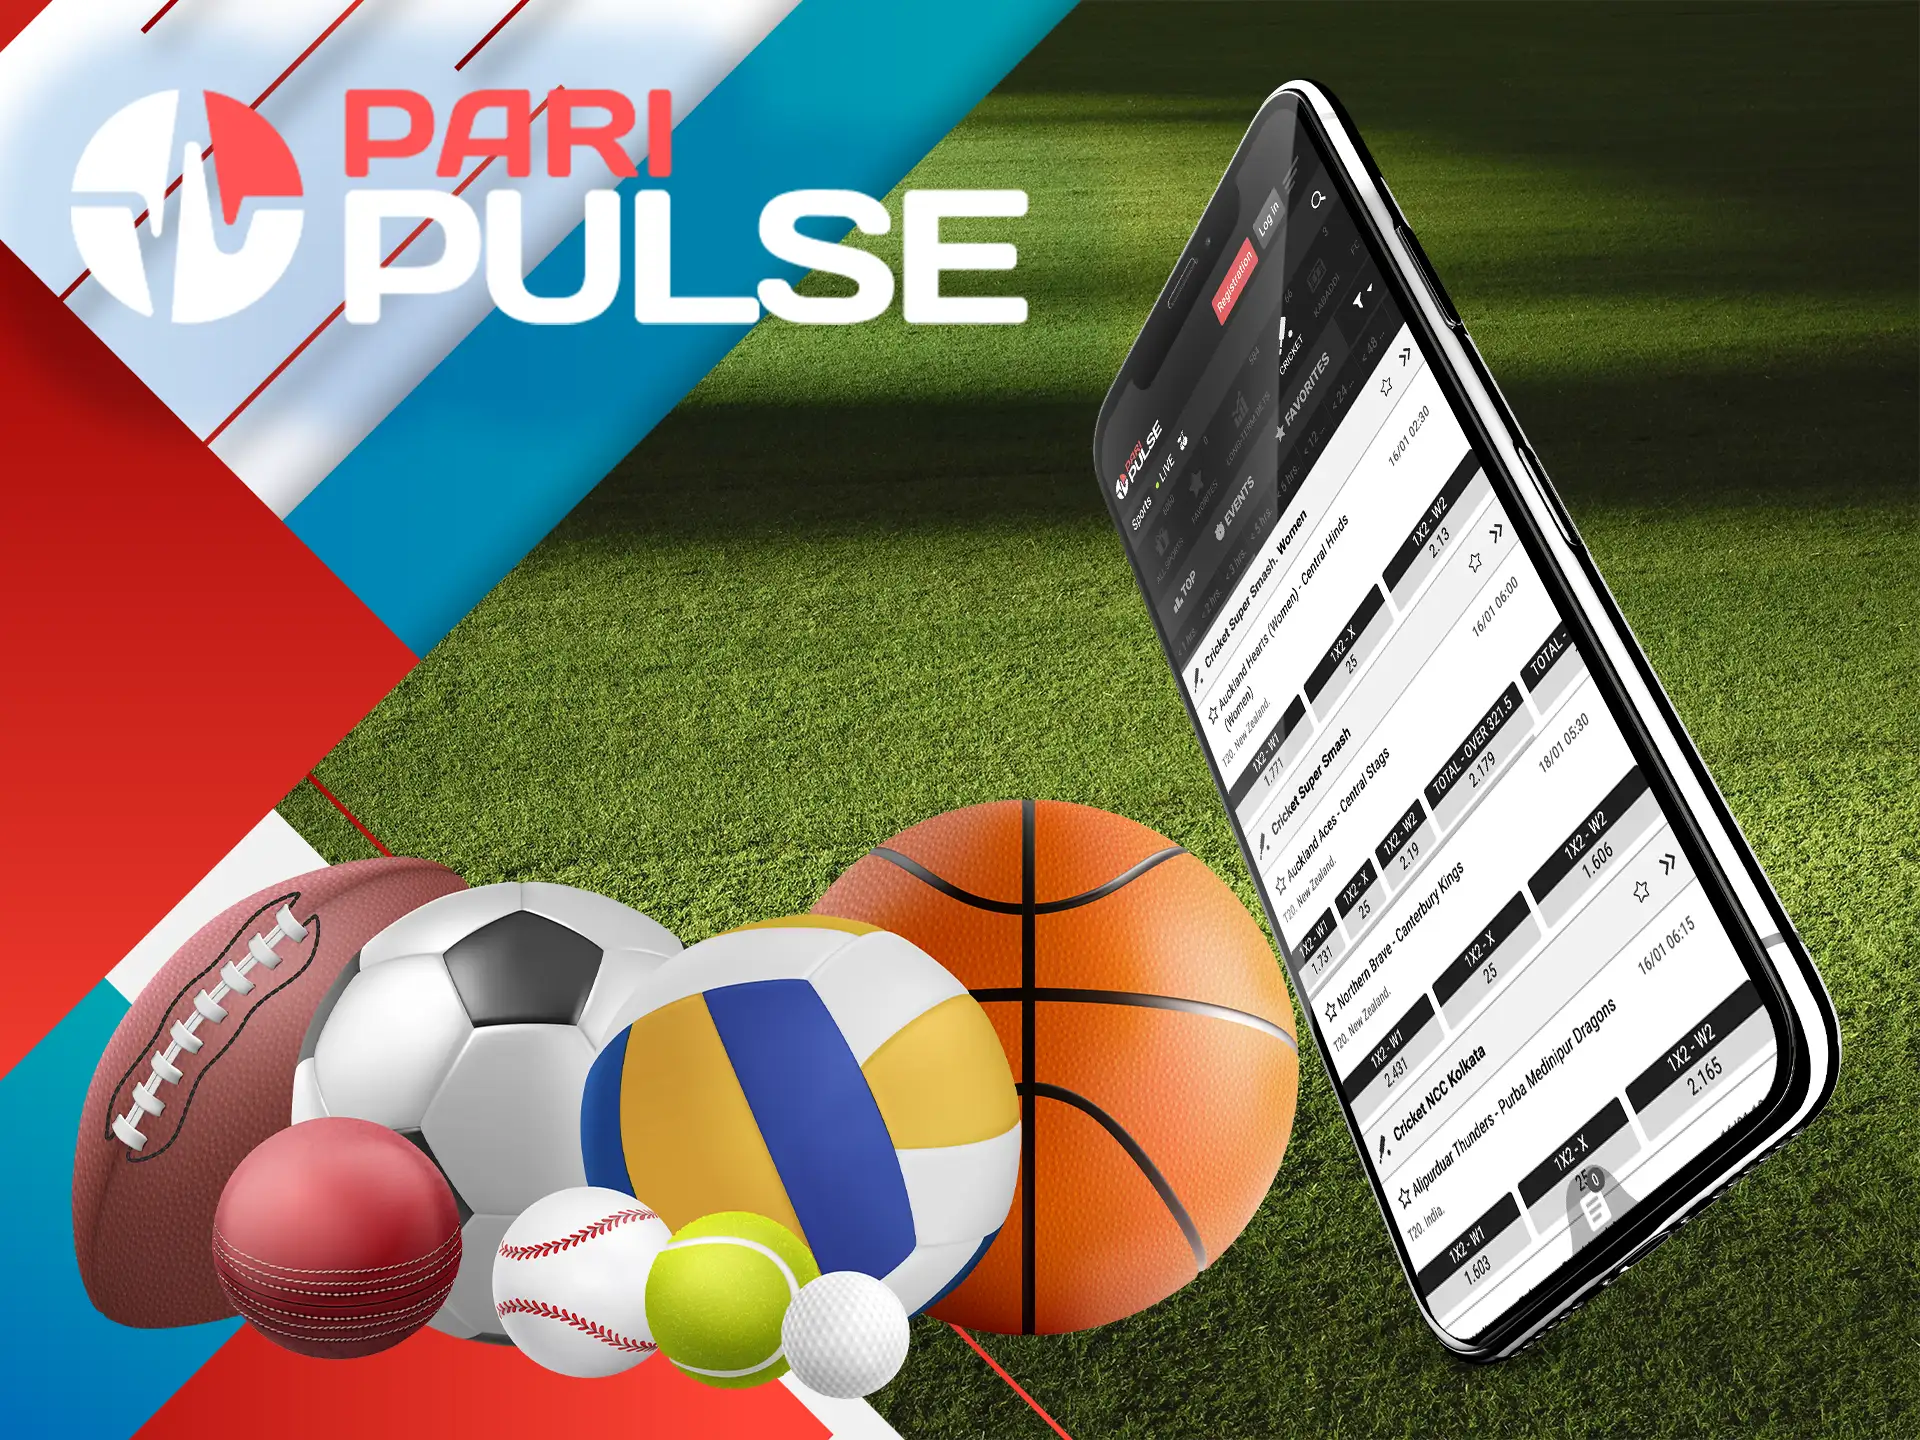 The main disciplines in this section of PariPulse are horse racing and cricket which are very popular in Bangladesh.